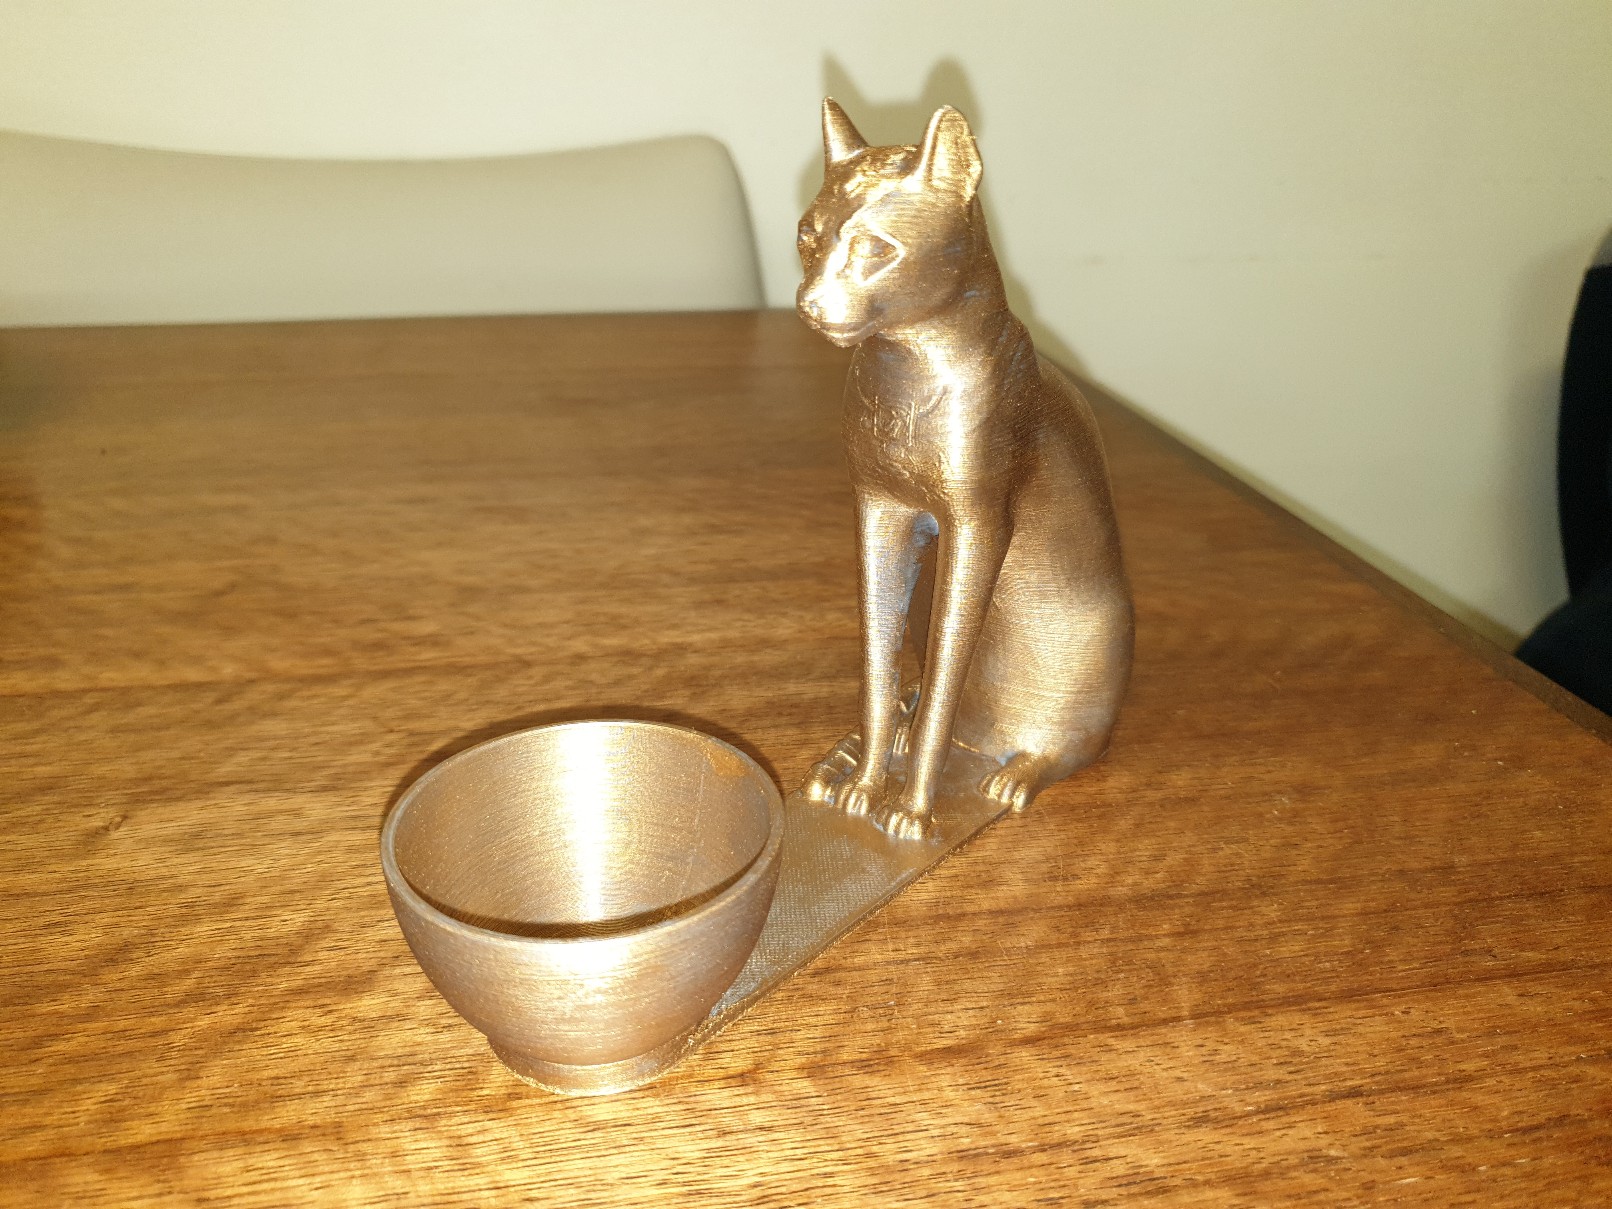 Gayer-Anderson Cat Egg cup/ Jewellery holder